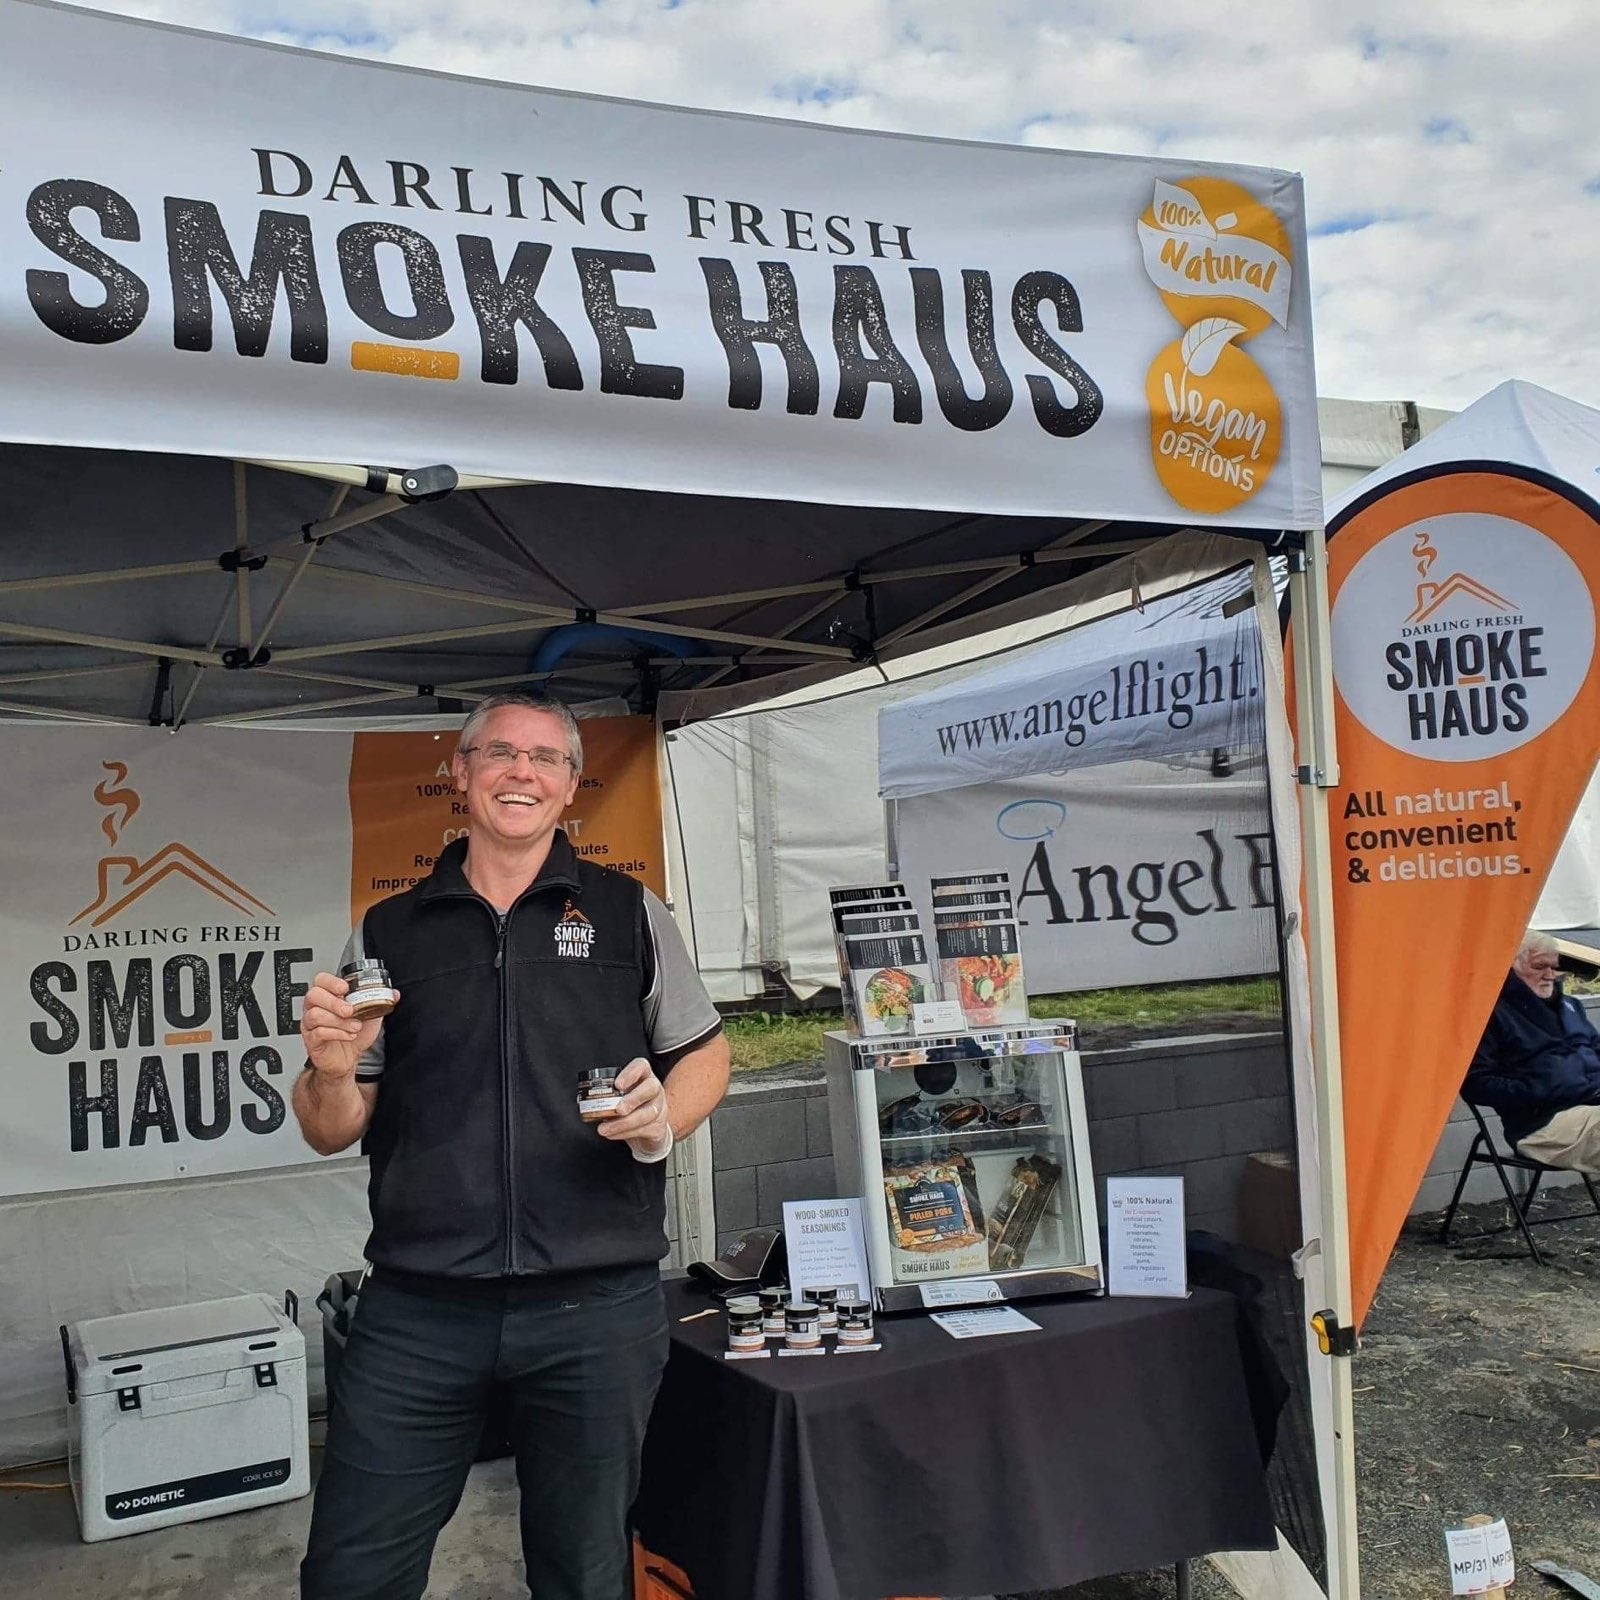 Jeff Schultheiss holding the new range of Wood-Smoked Seasonings at the DF Smoke Haus stall at FarmFest 2022